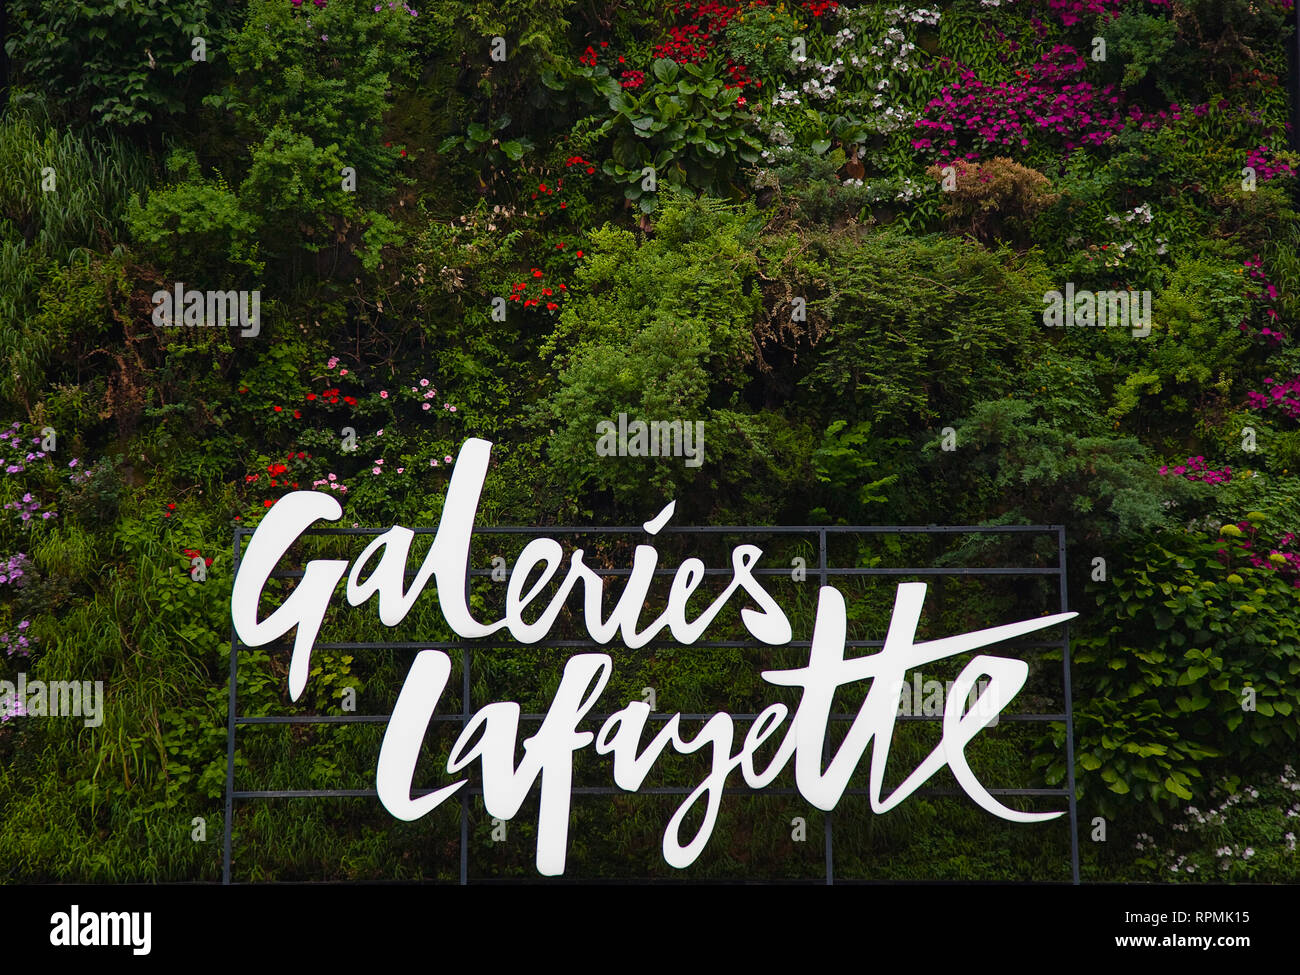 Germany, Berlin, Mitte, Friedrichstrasse, Vertical planting on Galeries Lafayette department store exterior. Stock Photo